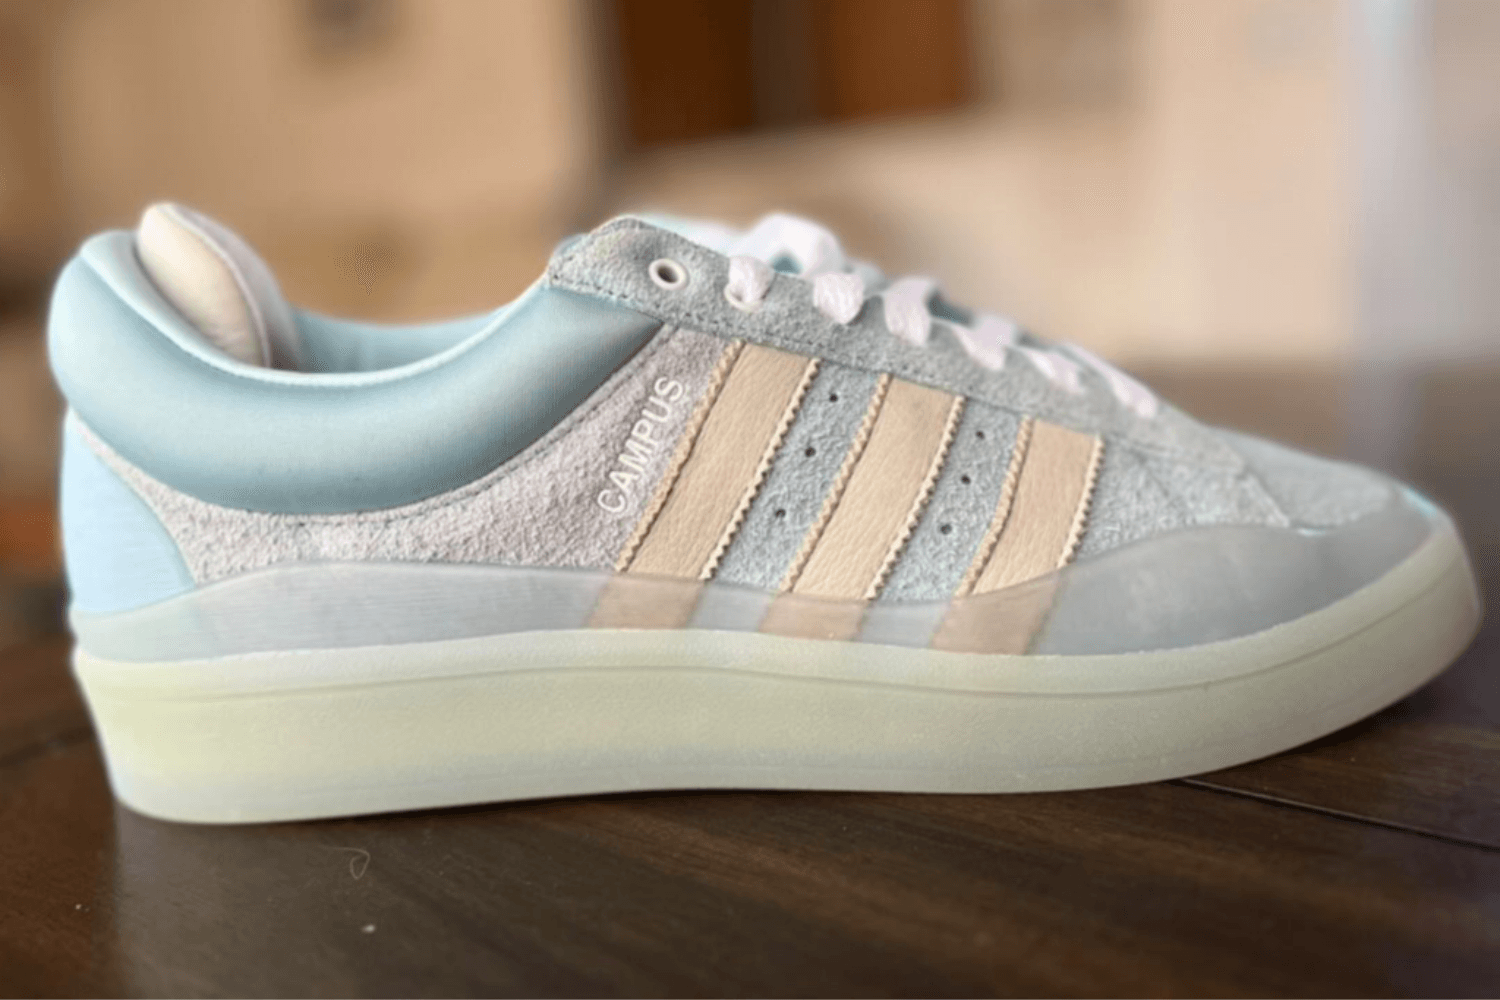 The first images of the Bad Bunny x falsas adidas Campus 'Blue Tint'